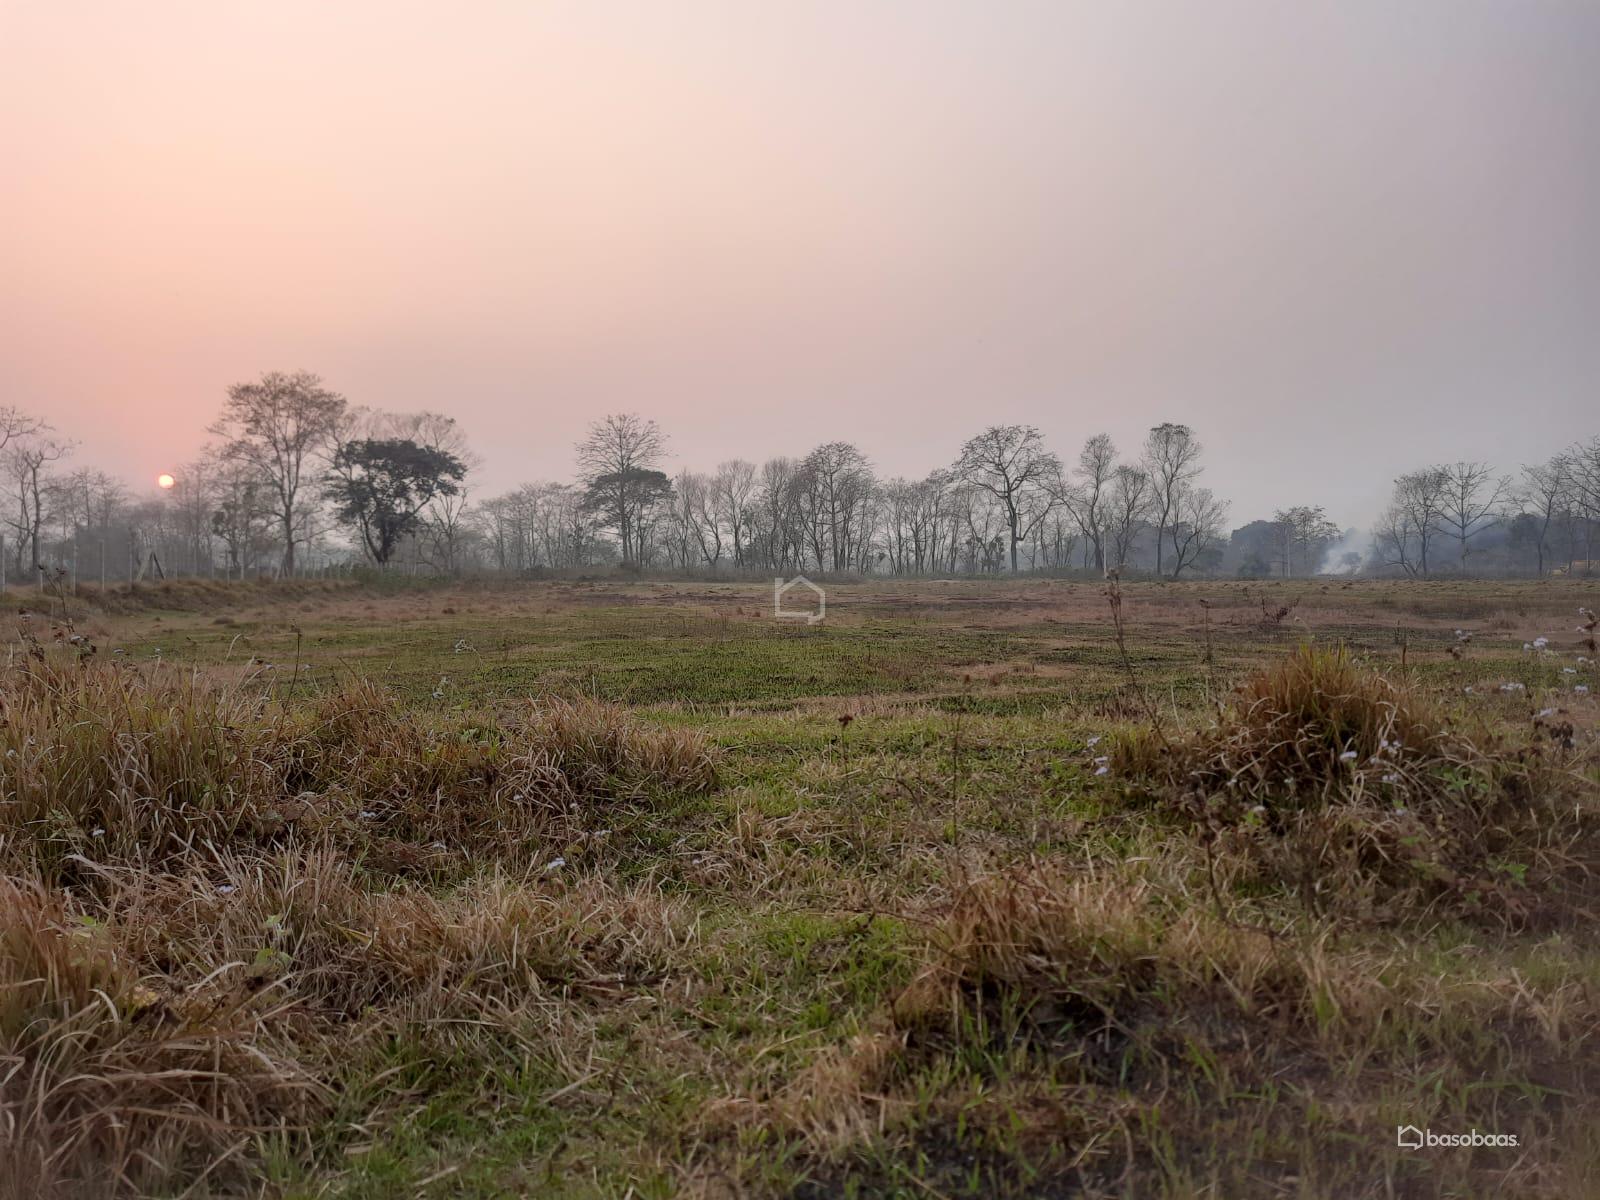 Commercial or Agriculture Land : Land for Sale in Bharatpur, Chitwan Image 3